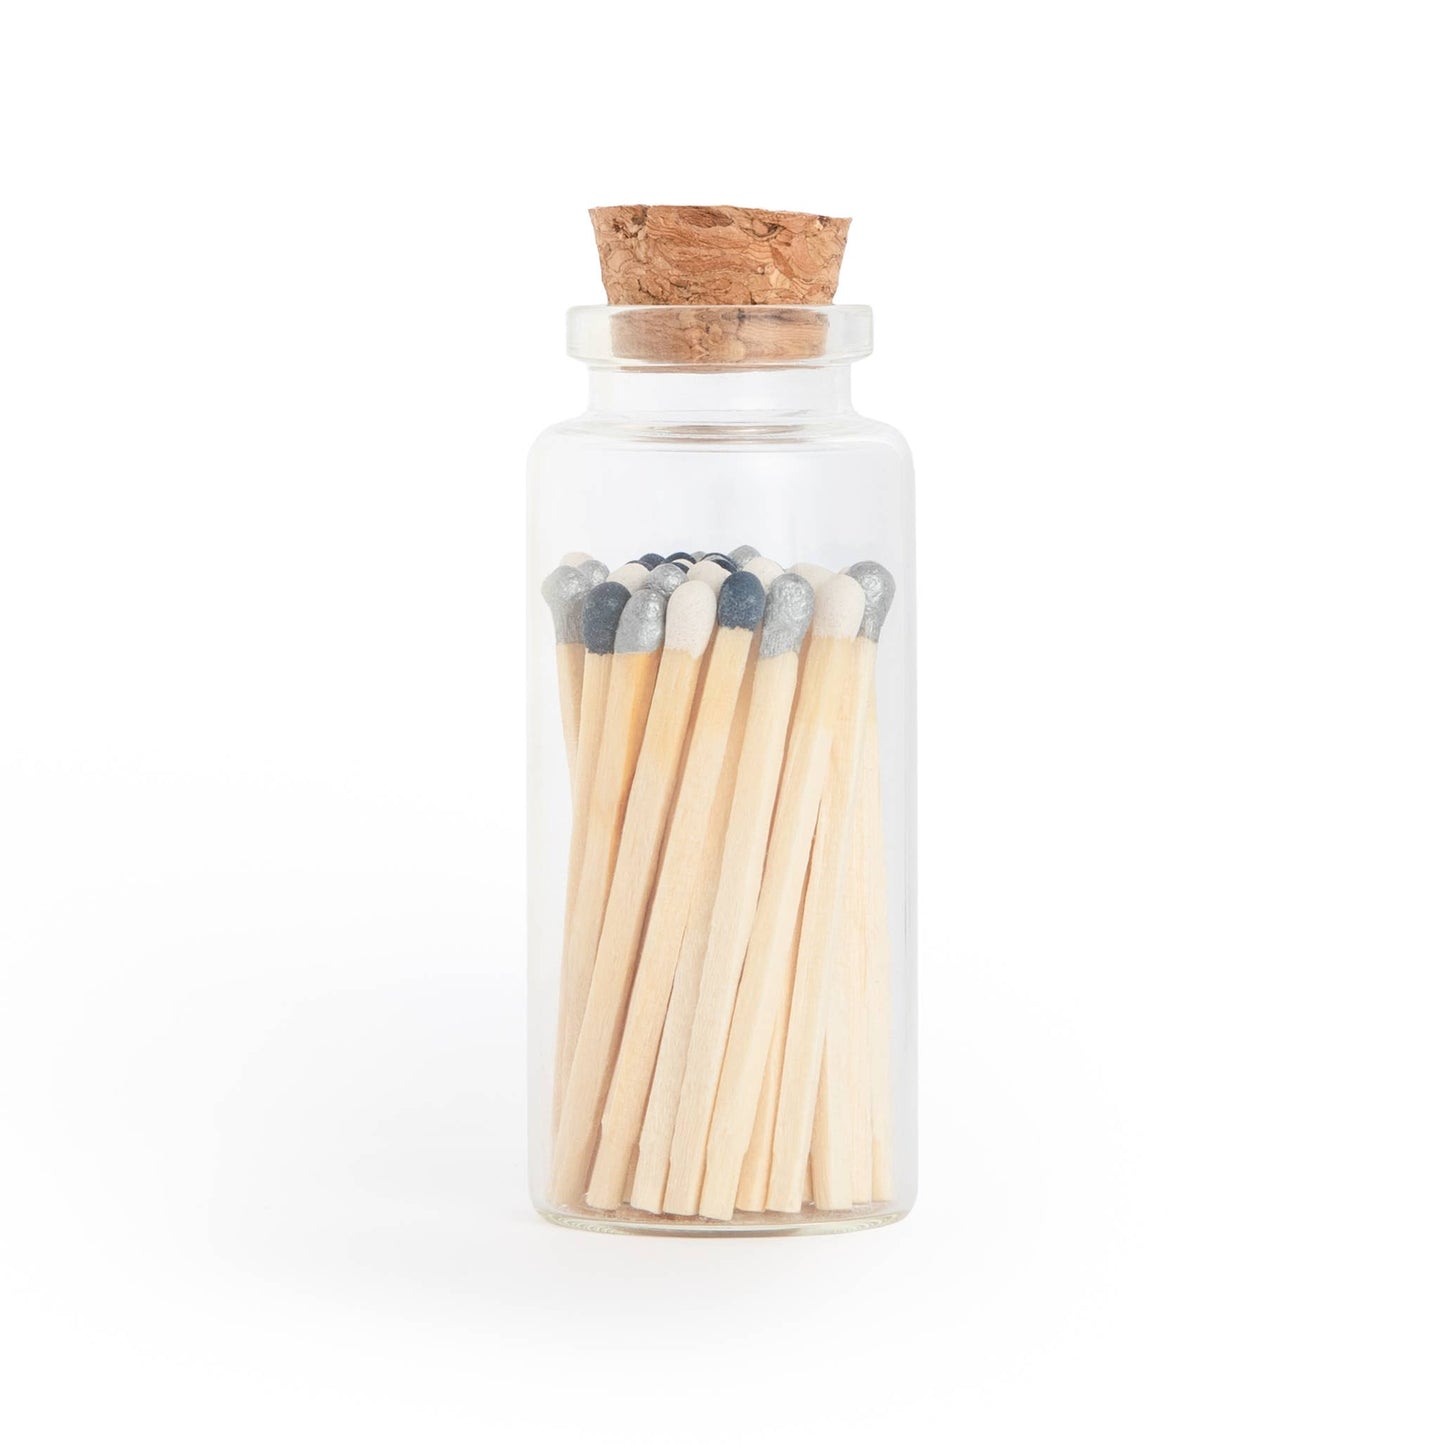 Starry Night Matches in Medium Corked Vial